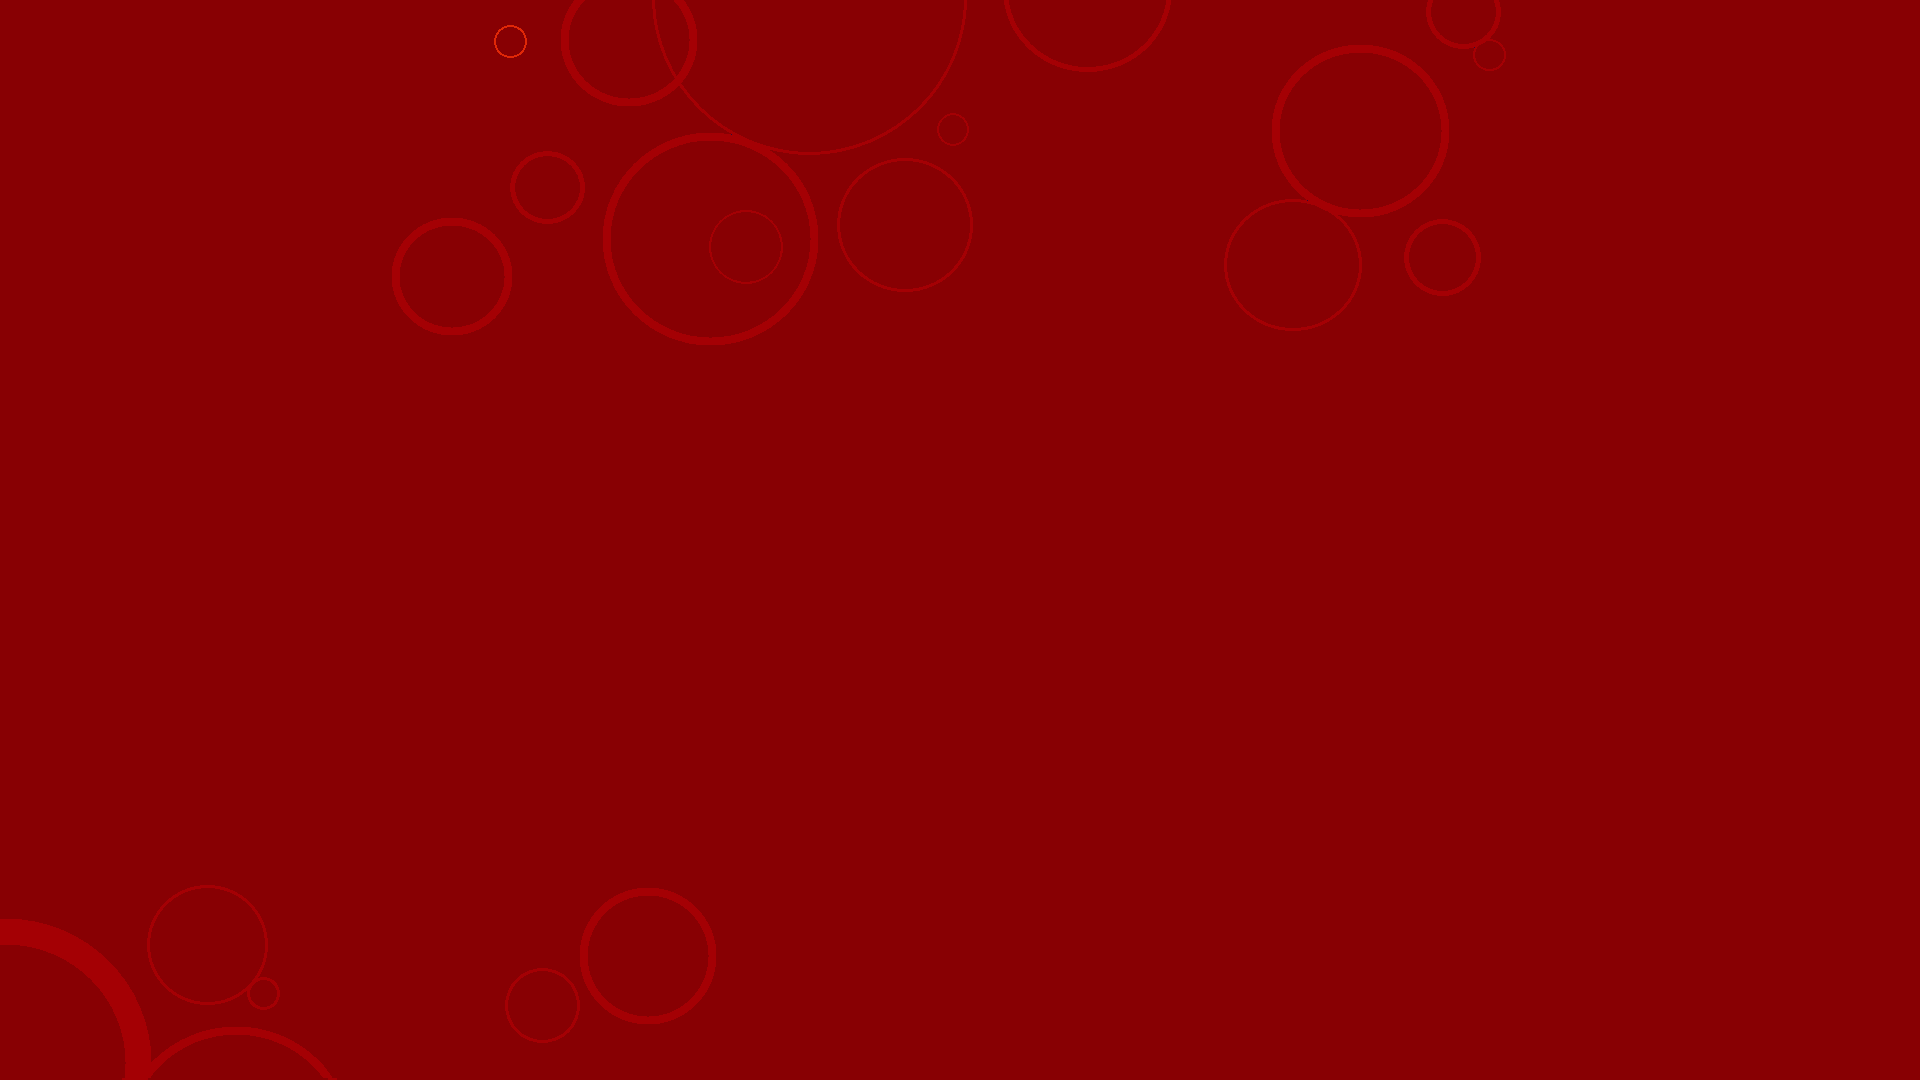 Red Windows Wallpaper Pictures In High Definition Or